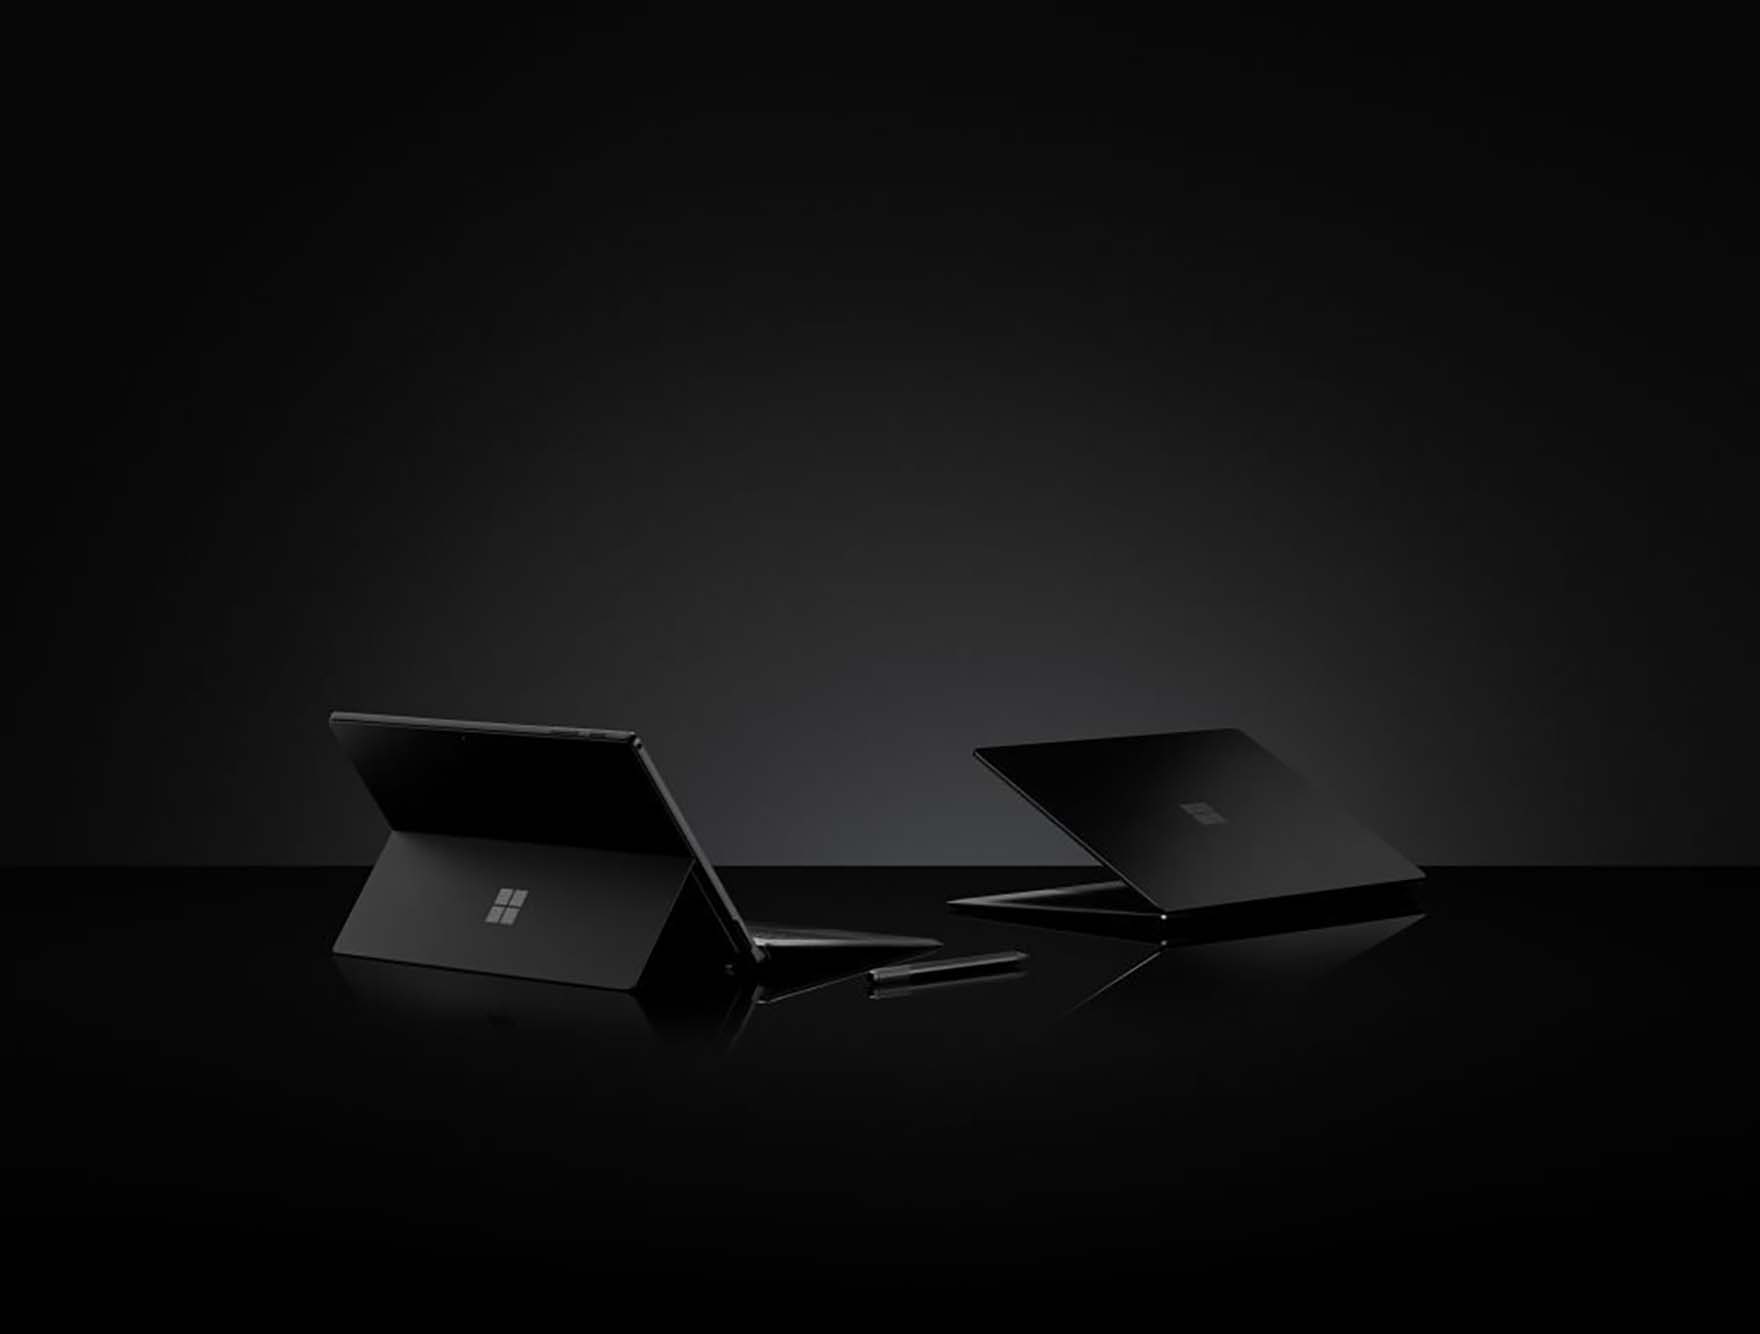 Surface 6 Pro in Black